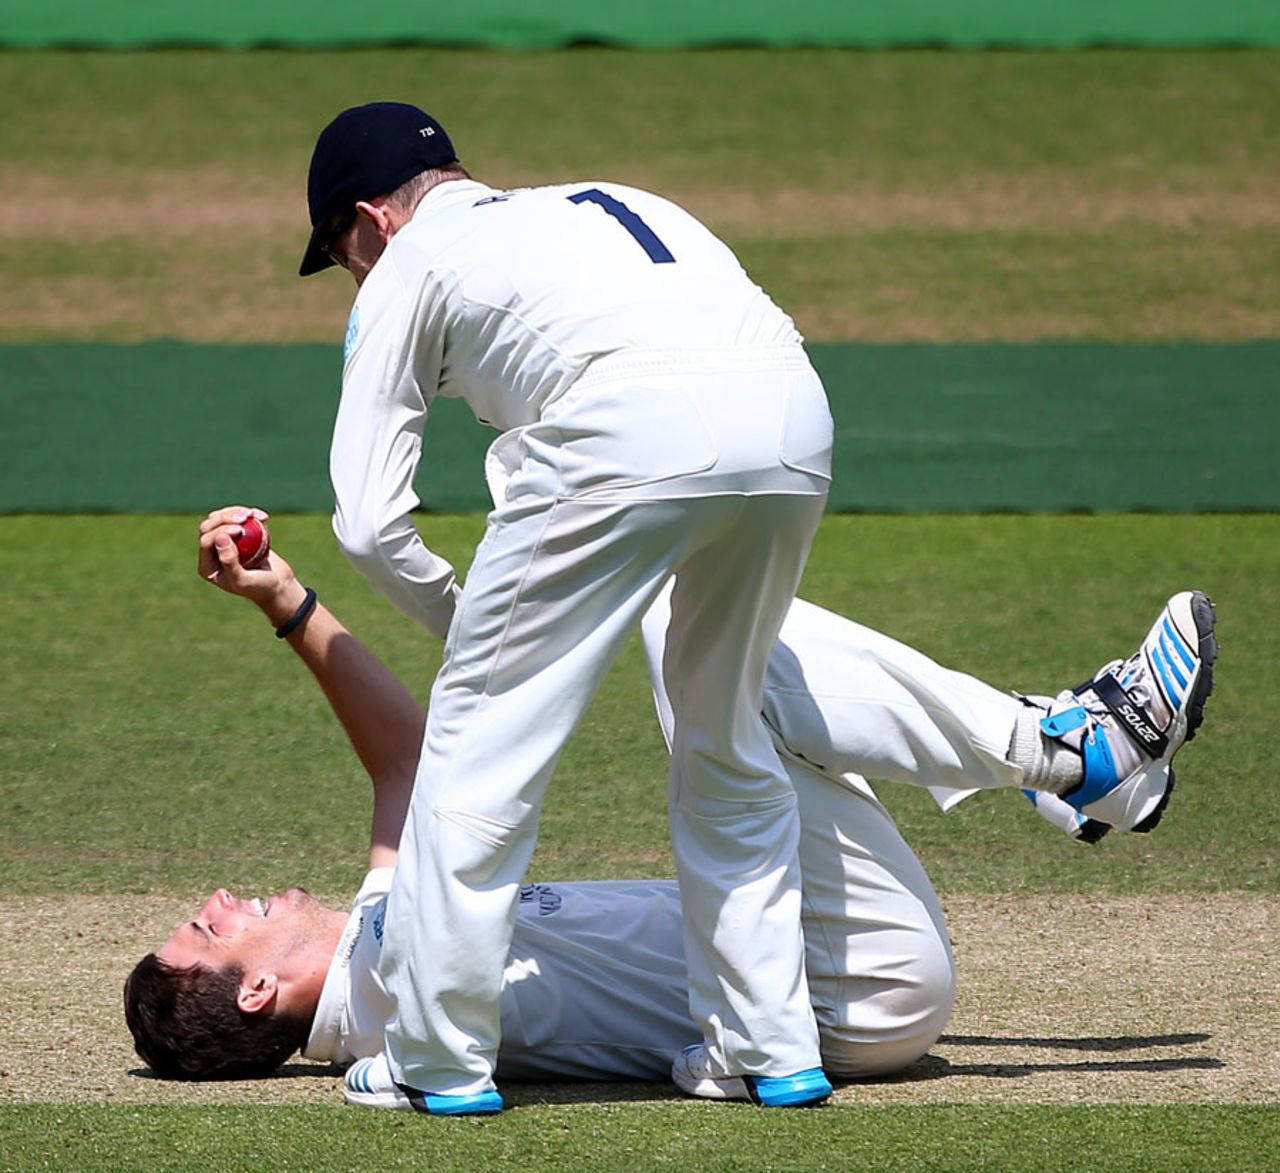 Putting his back into it: Steven Finn claimed a catch off his own bowling, Middlesex v Northamptonshire, County Championship, Division One, Lord's, 3rd day, July 1, 2014